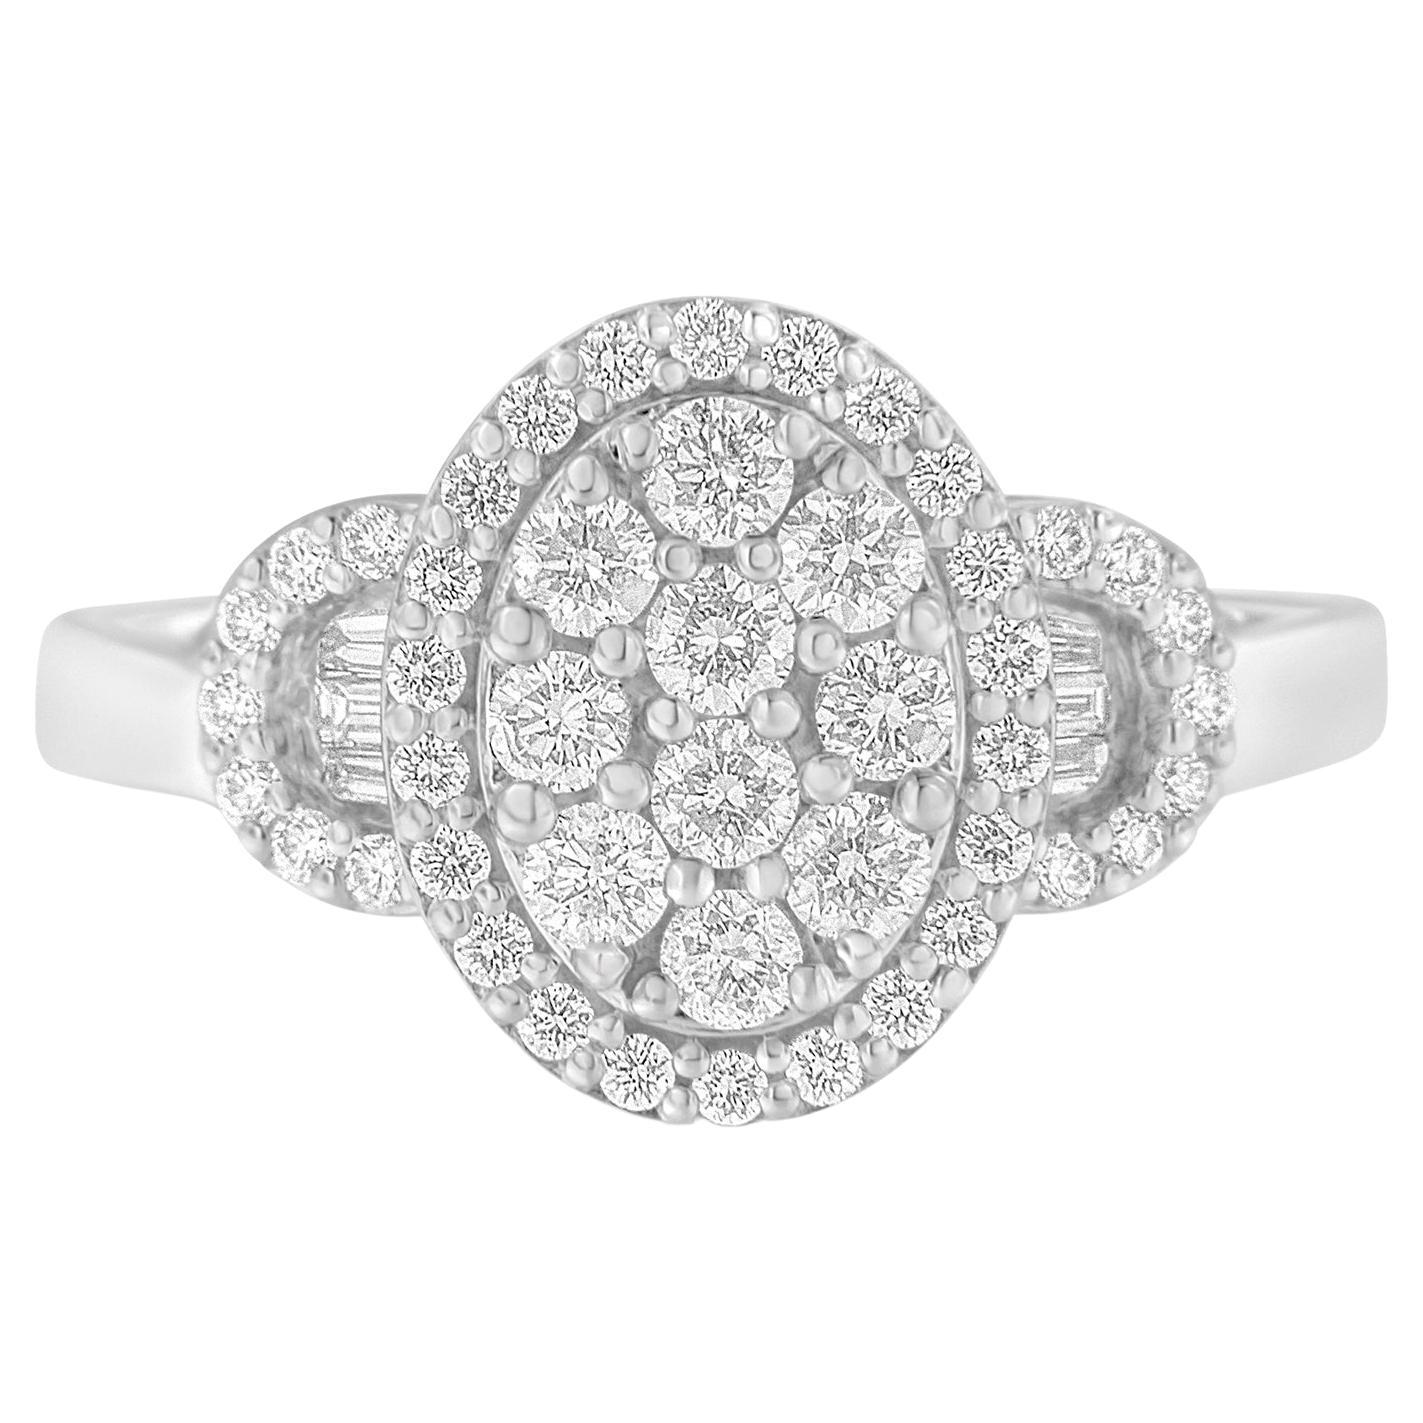 For Sale:  10K White Gold 1.0 Ct Diamond Oval Cluster Art Deco Buckle Style Statement Ring